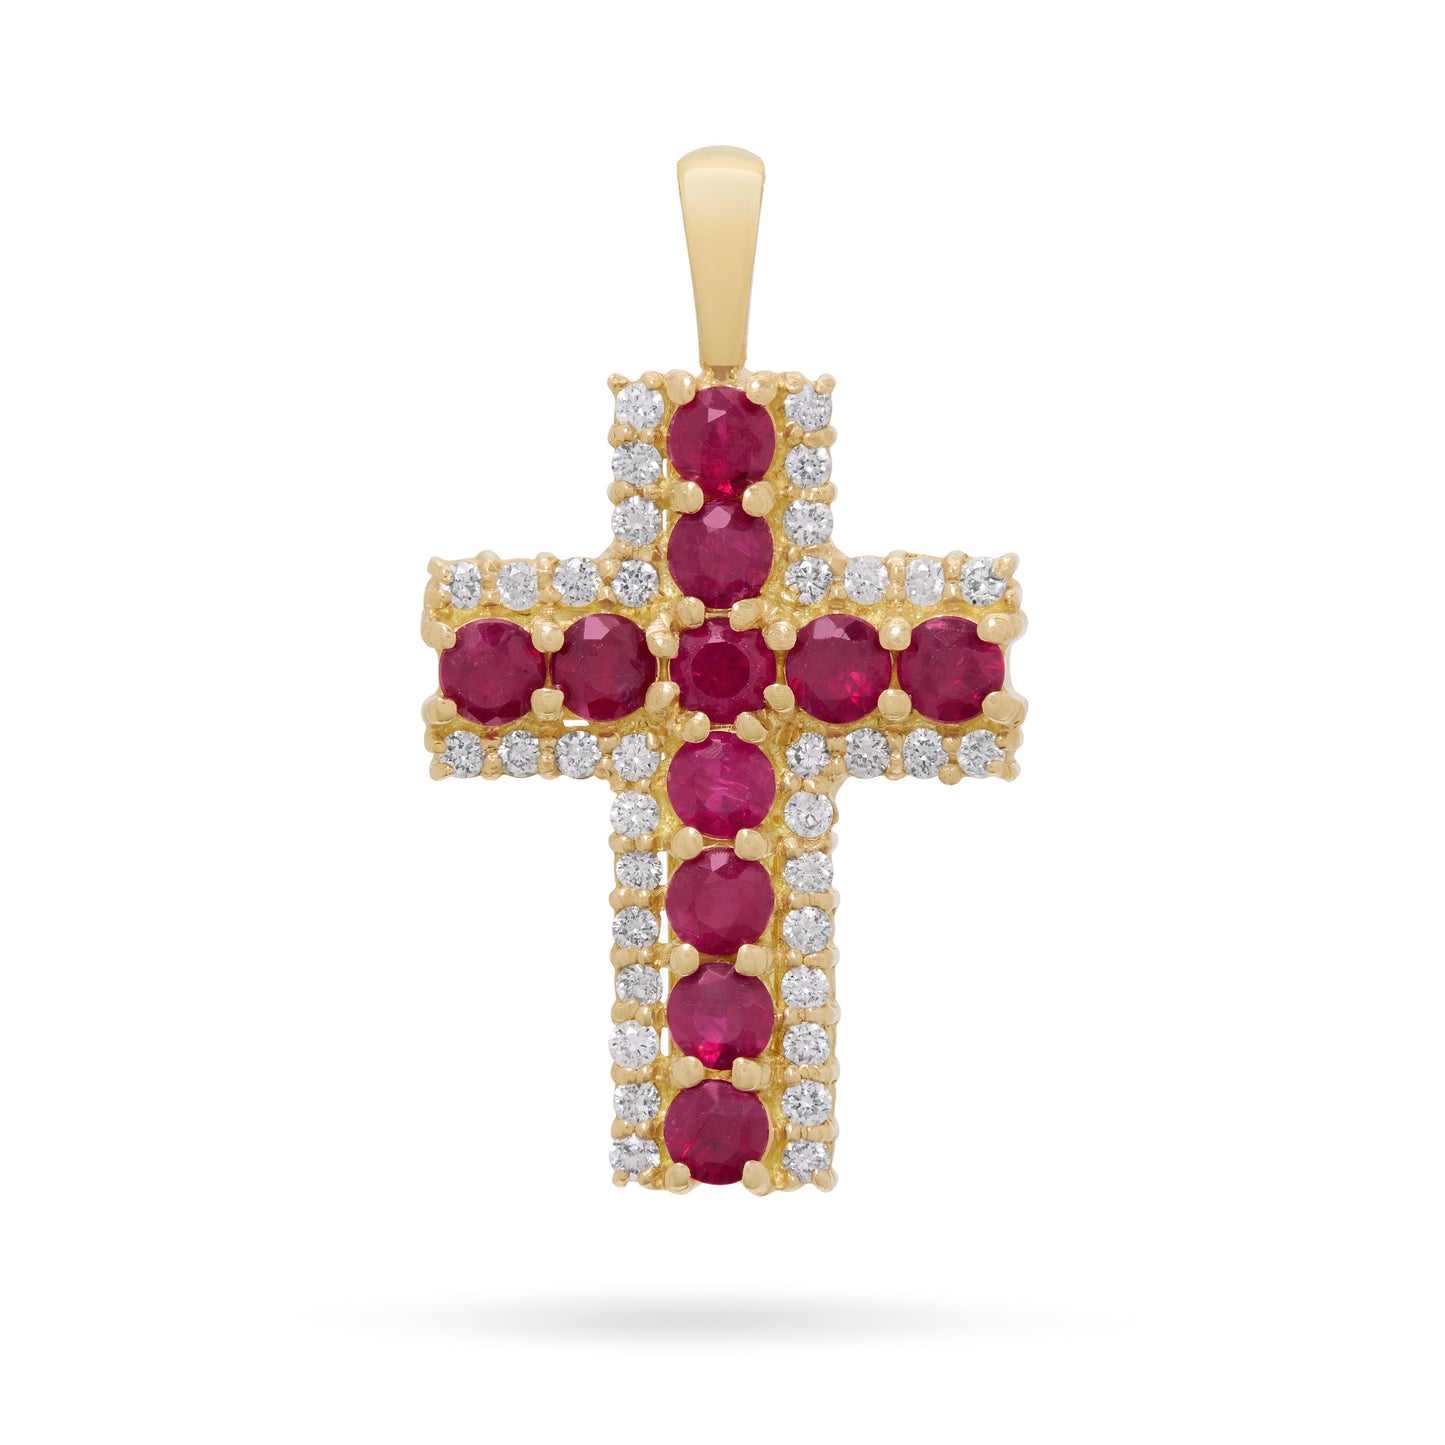 Mondo Cattolico Pendant 13x18 mm (0.51x0.71 in) Yellow Gold Cross Pendant with Central Rubies and Diamonds